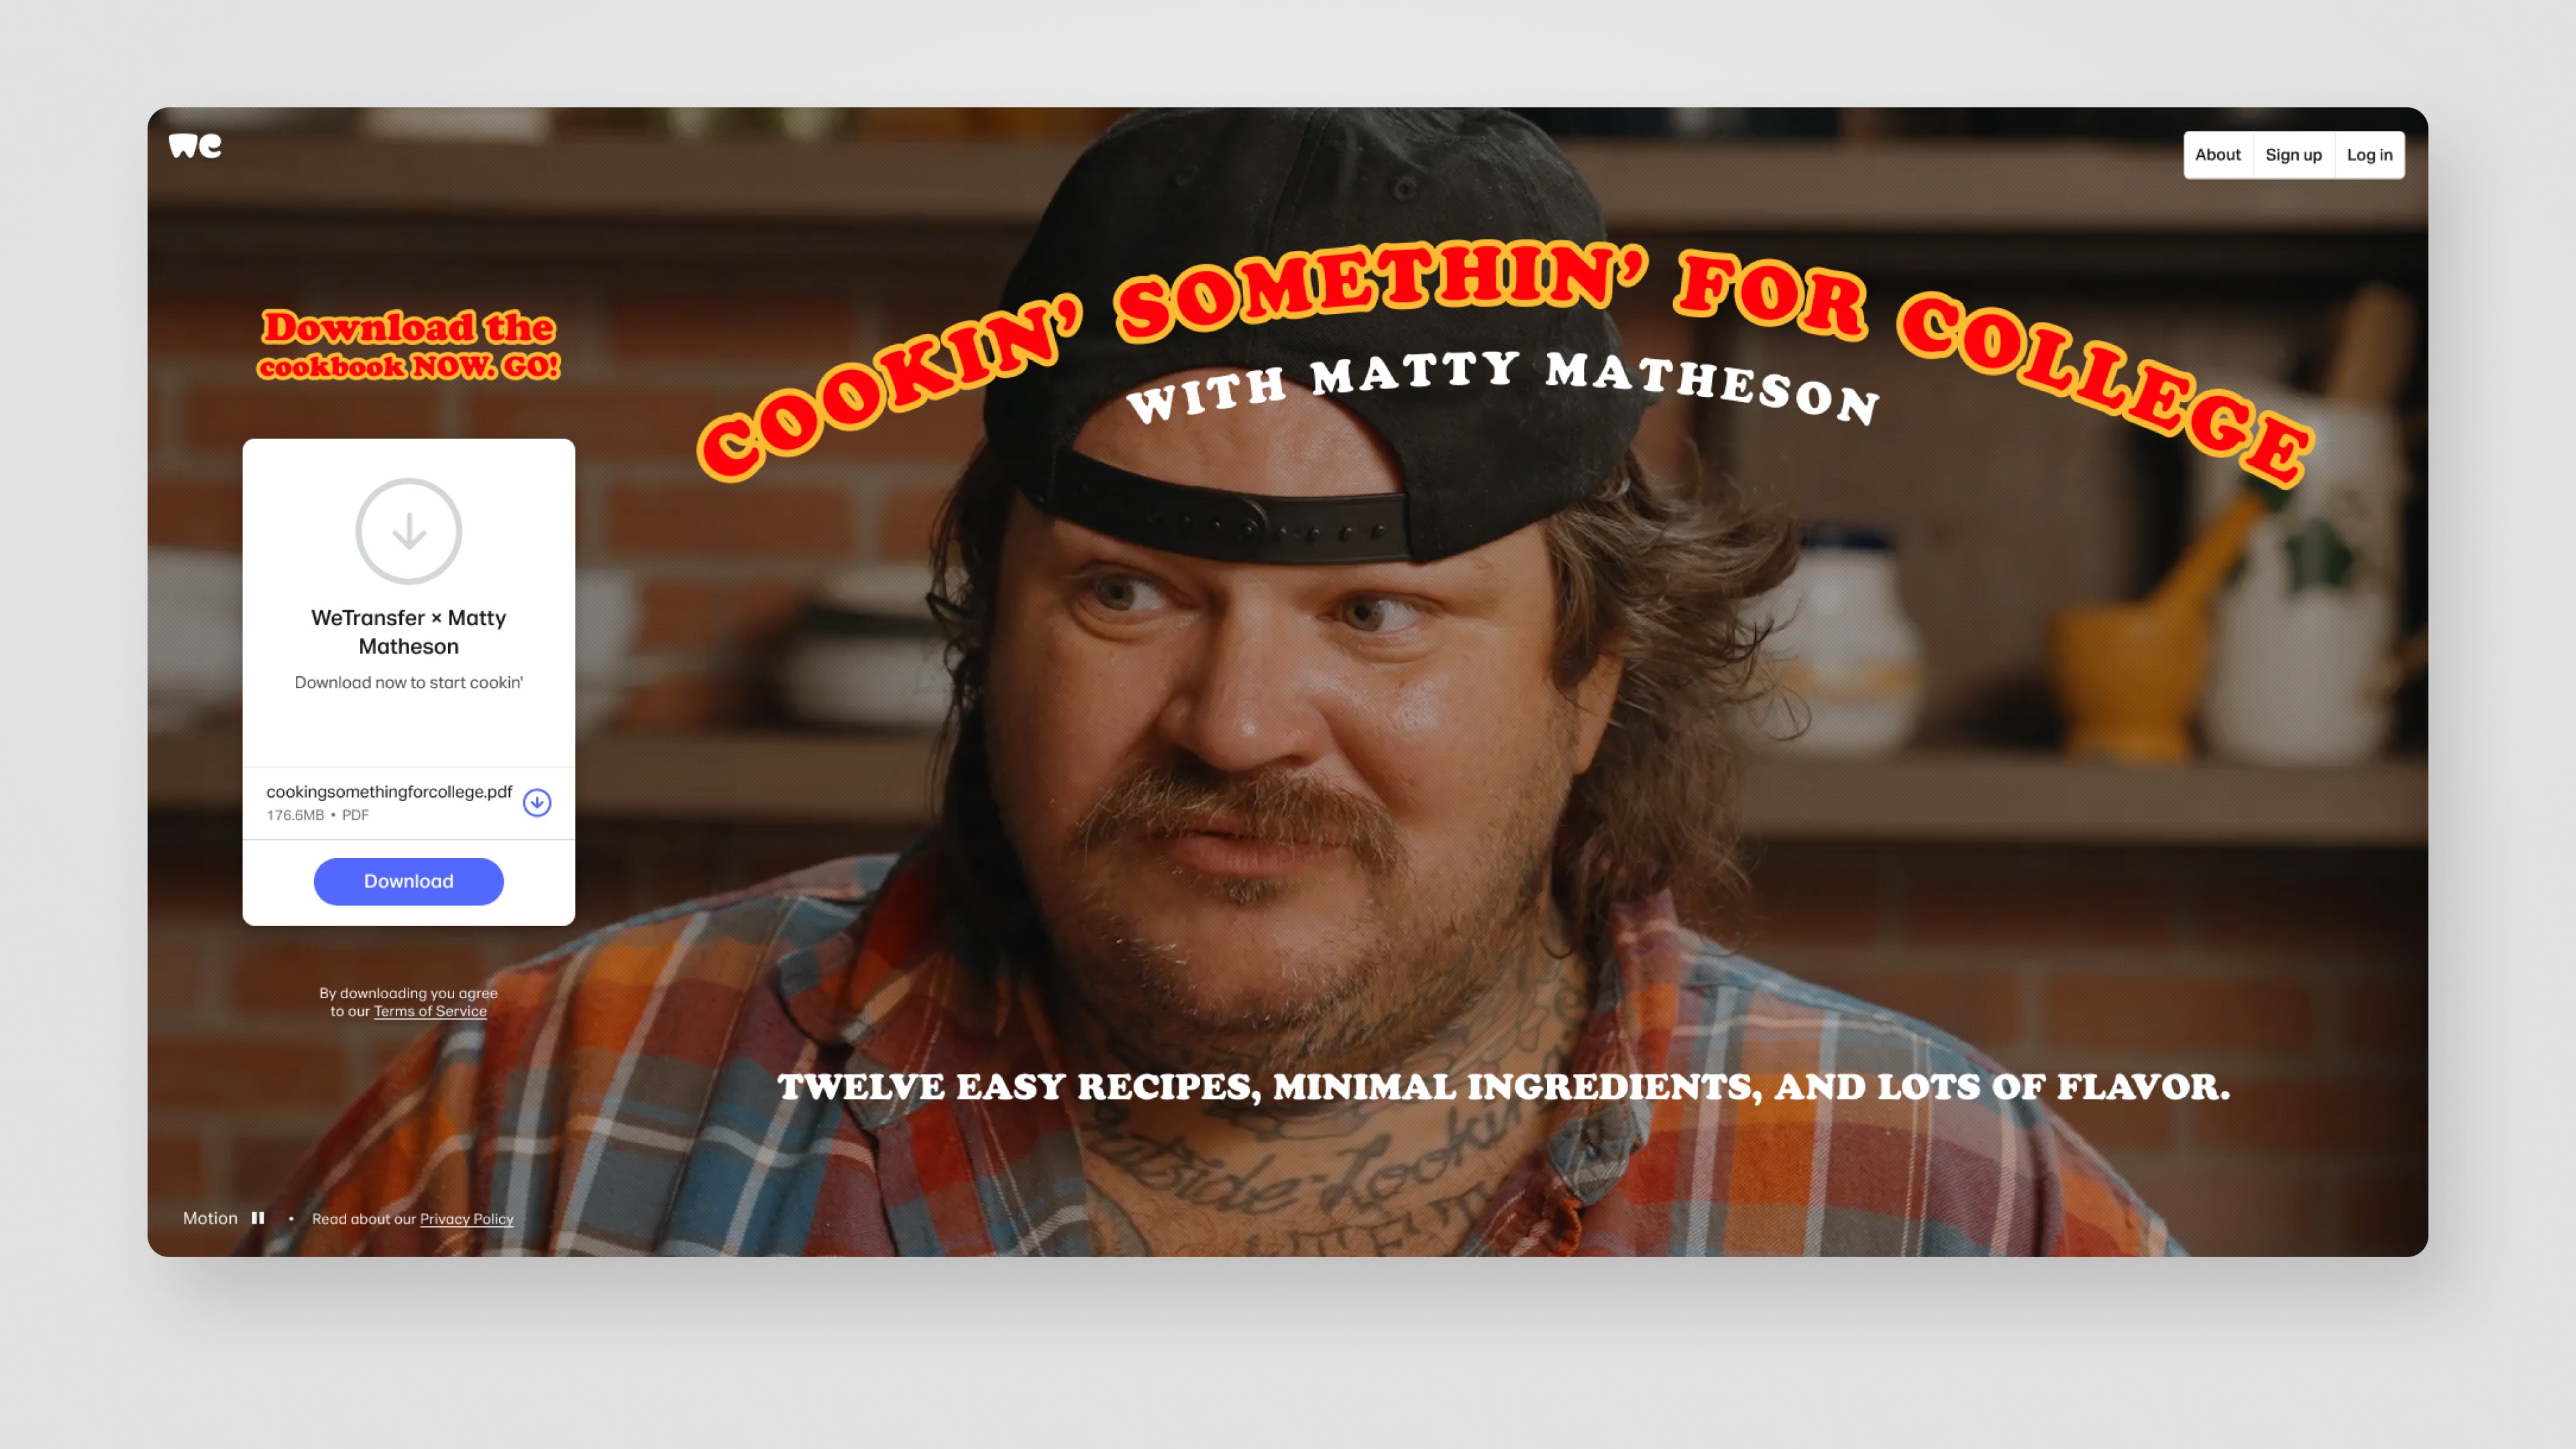 WeTransfer x Matty Matheson 'Cookin' Somethin' for College' Free